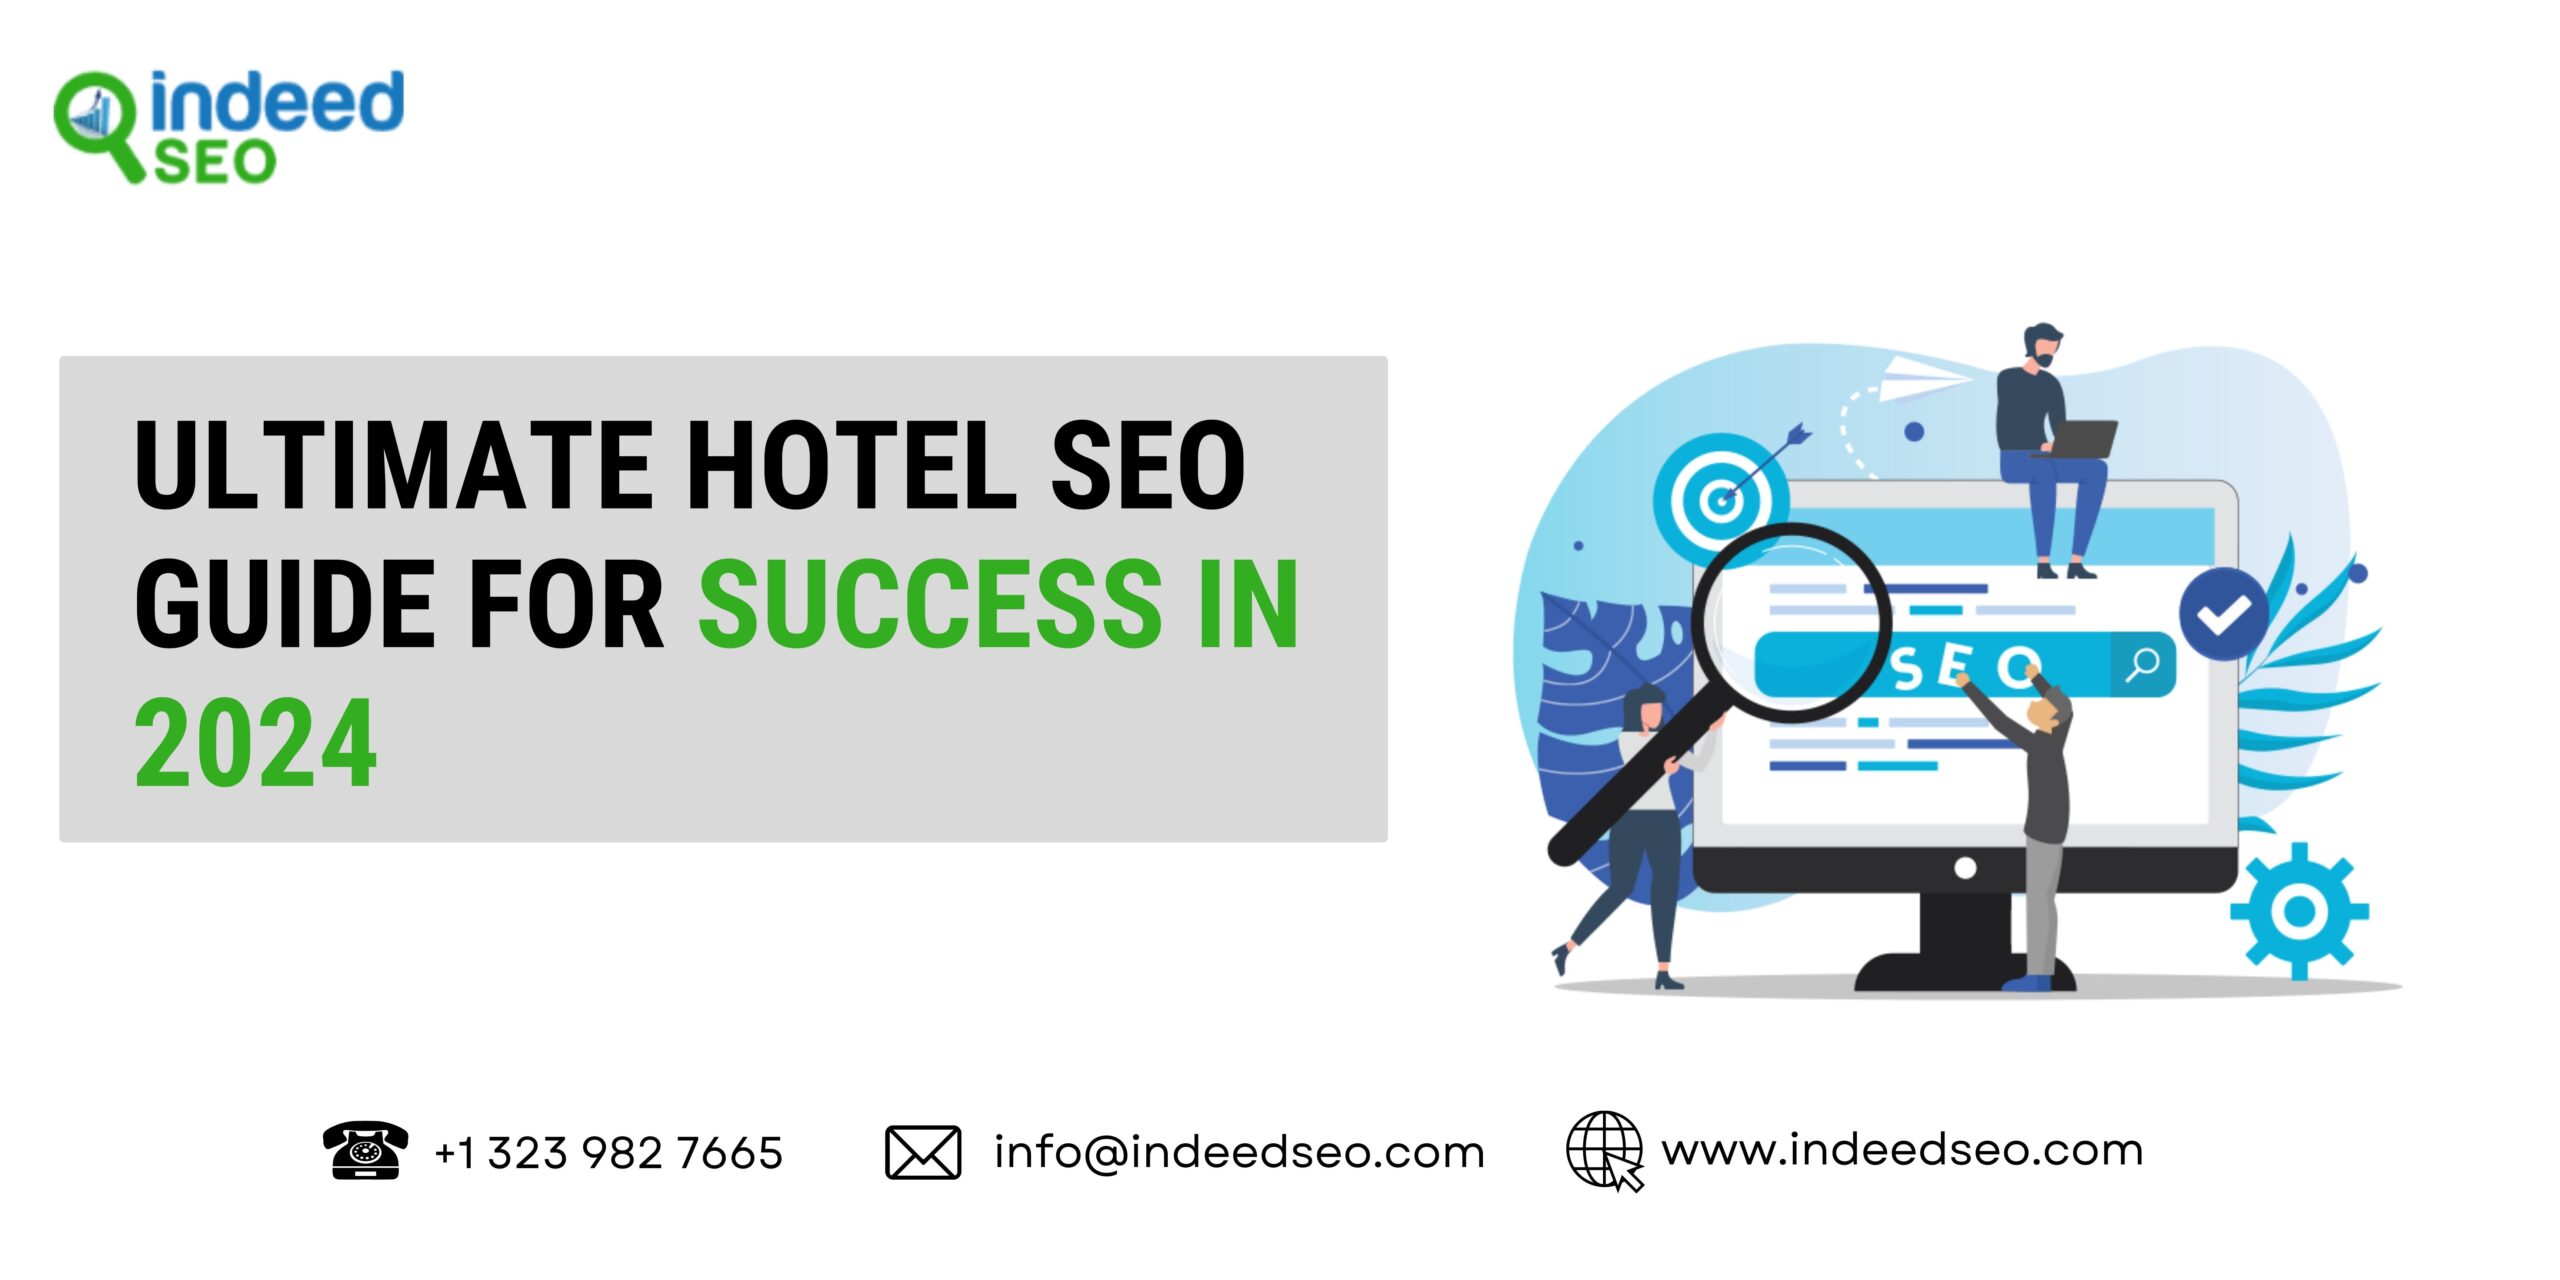 Ultimate Hotel SEO Guide for Success in 2024